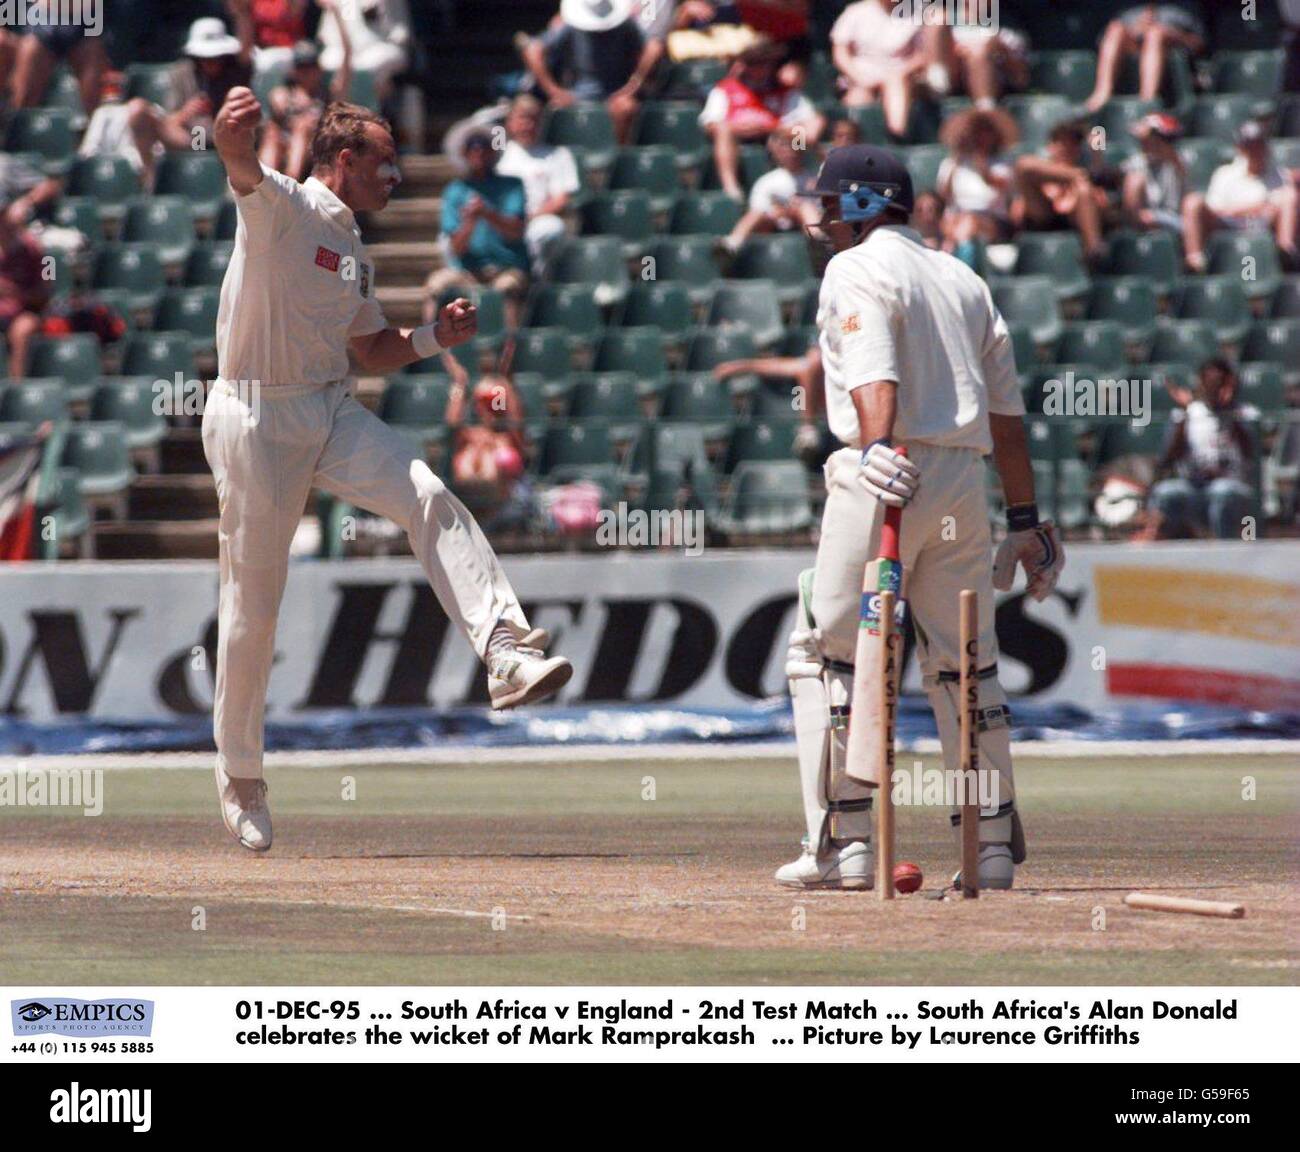 01-DEC-95, South Africa v England - 2nd Test Match, South Africa's Allan Donald celebrates the wicket of Mark Ramprakash, Picture by Laurence Griffiths Stock Photo